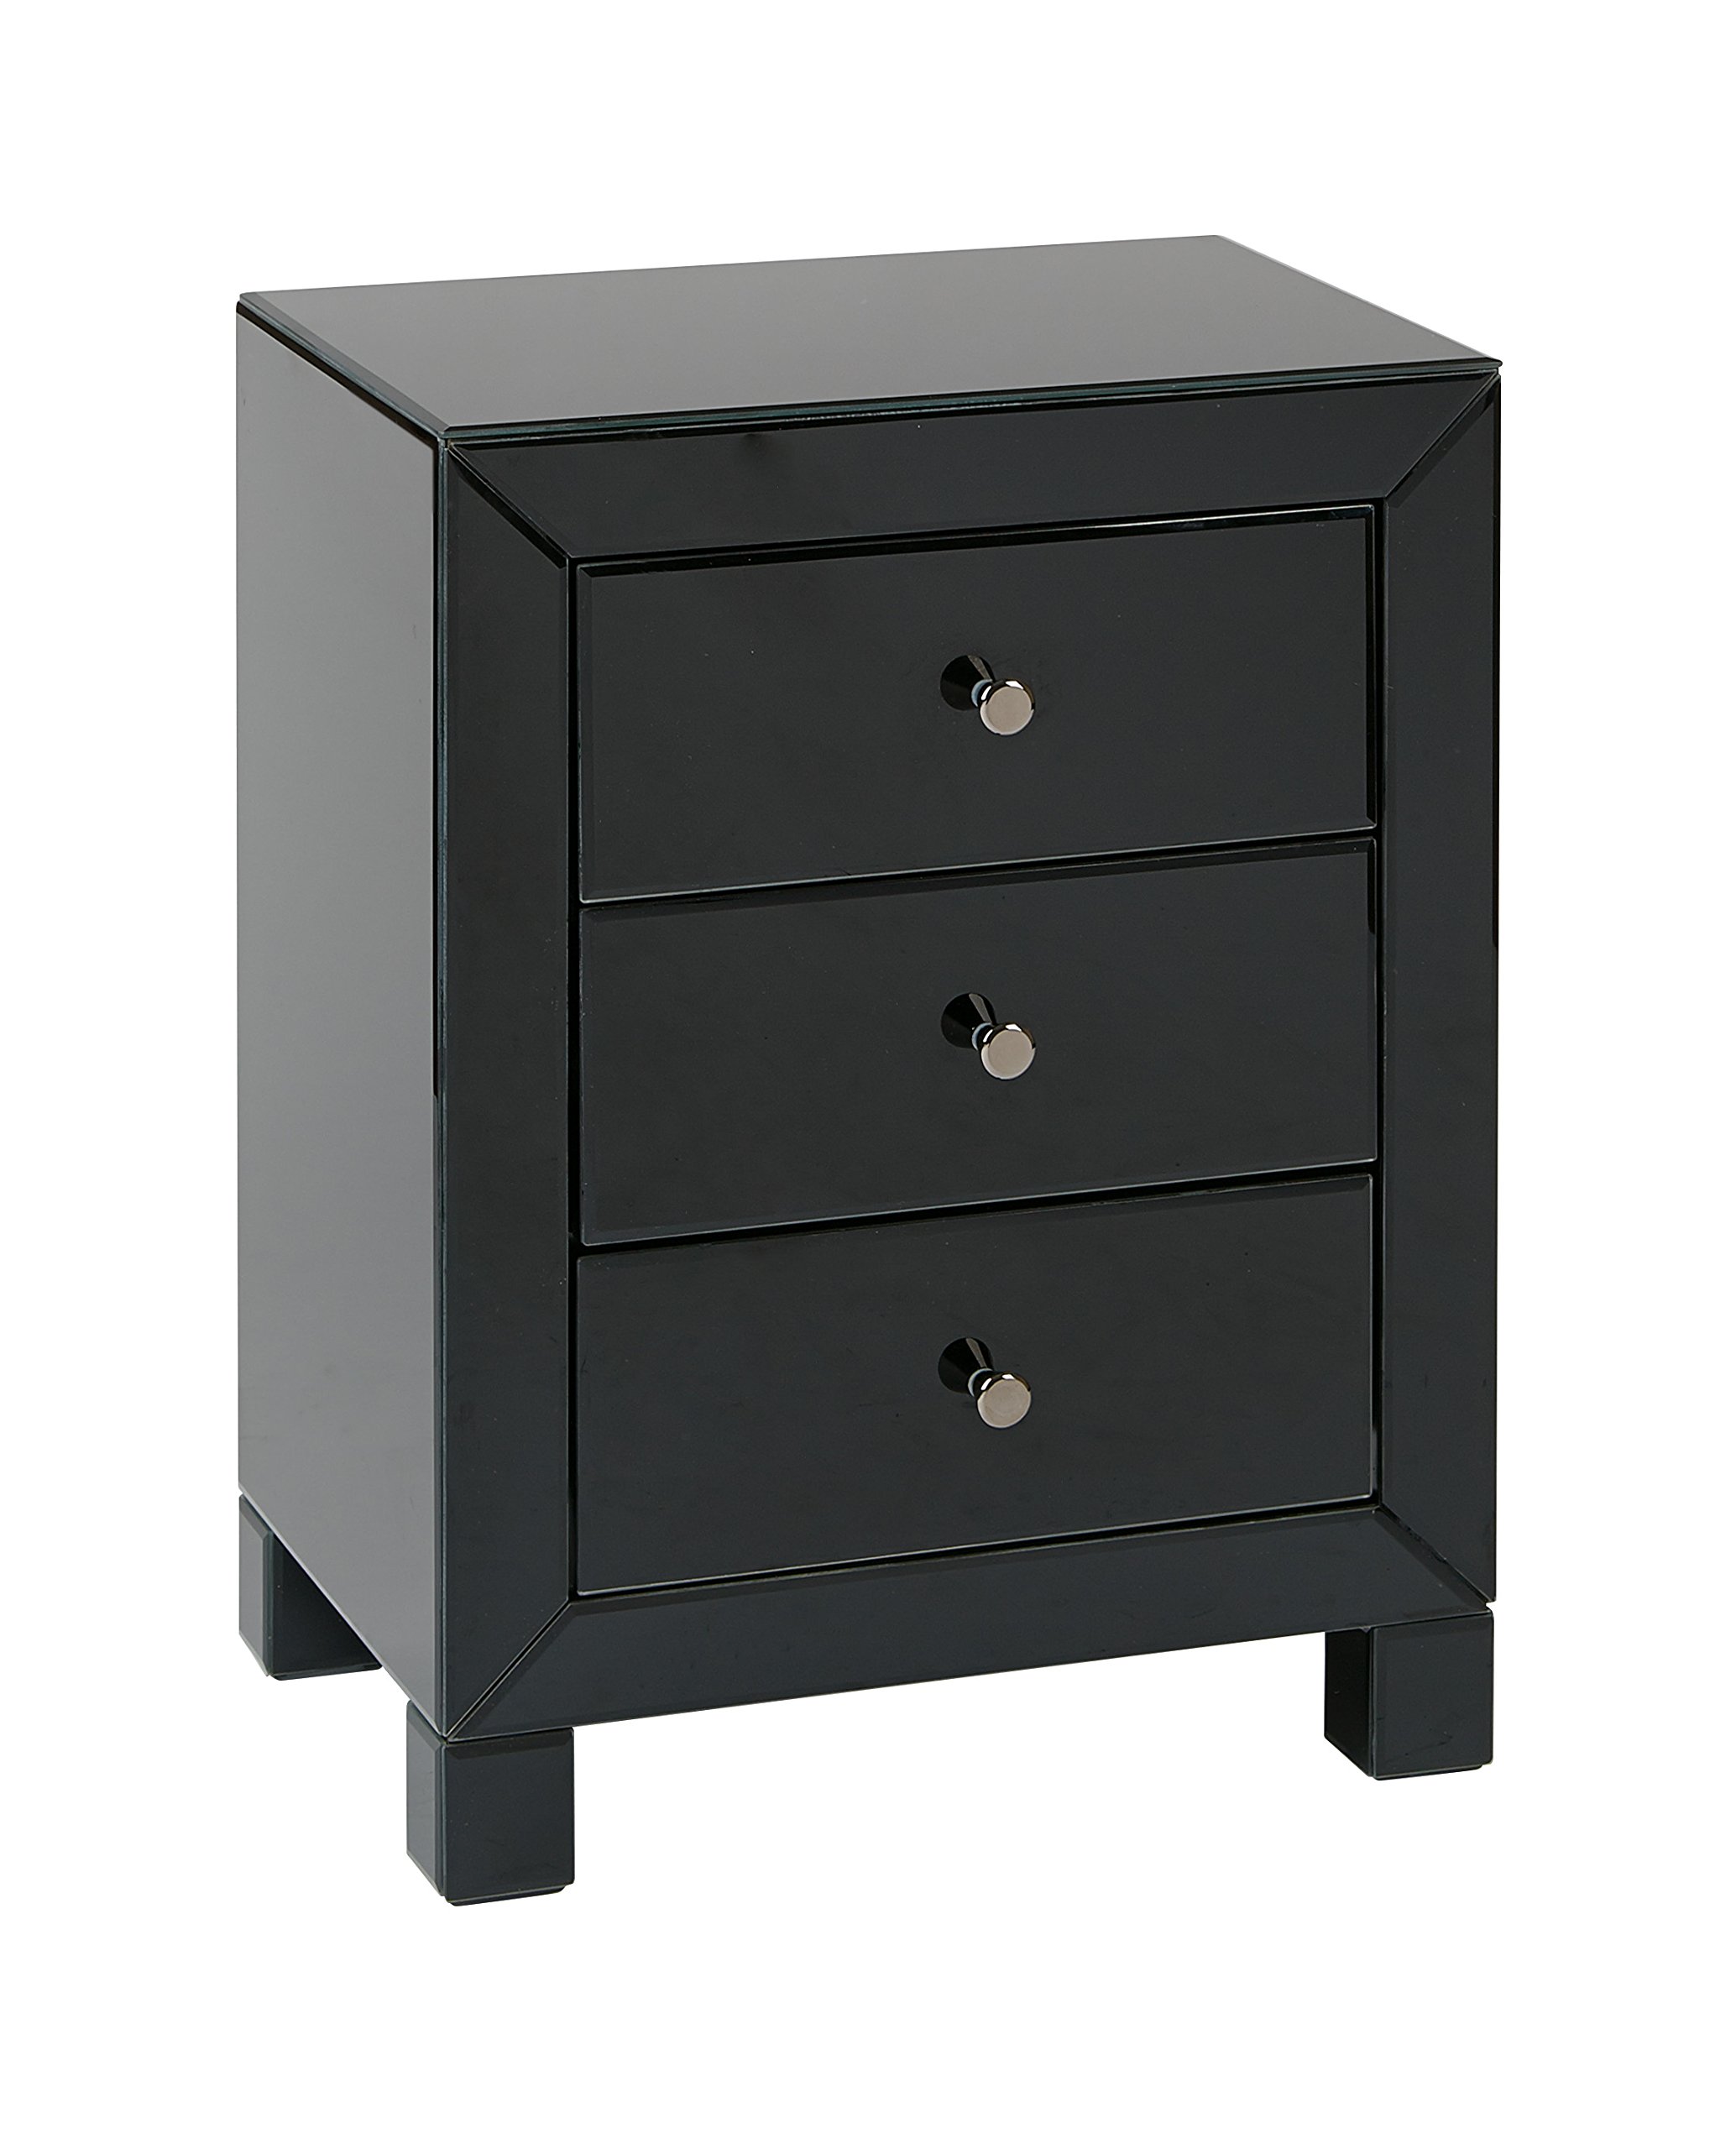 ave six reflections drawer accent table with mirrored three finish black glass kitchen dining corner computer desk hutch patio cushions ikea closet storage trestle bench seat